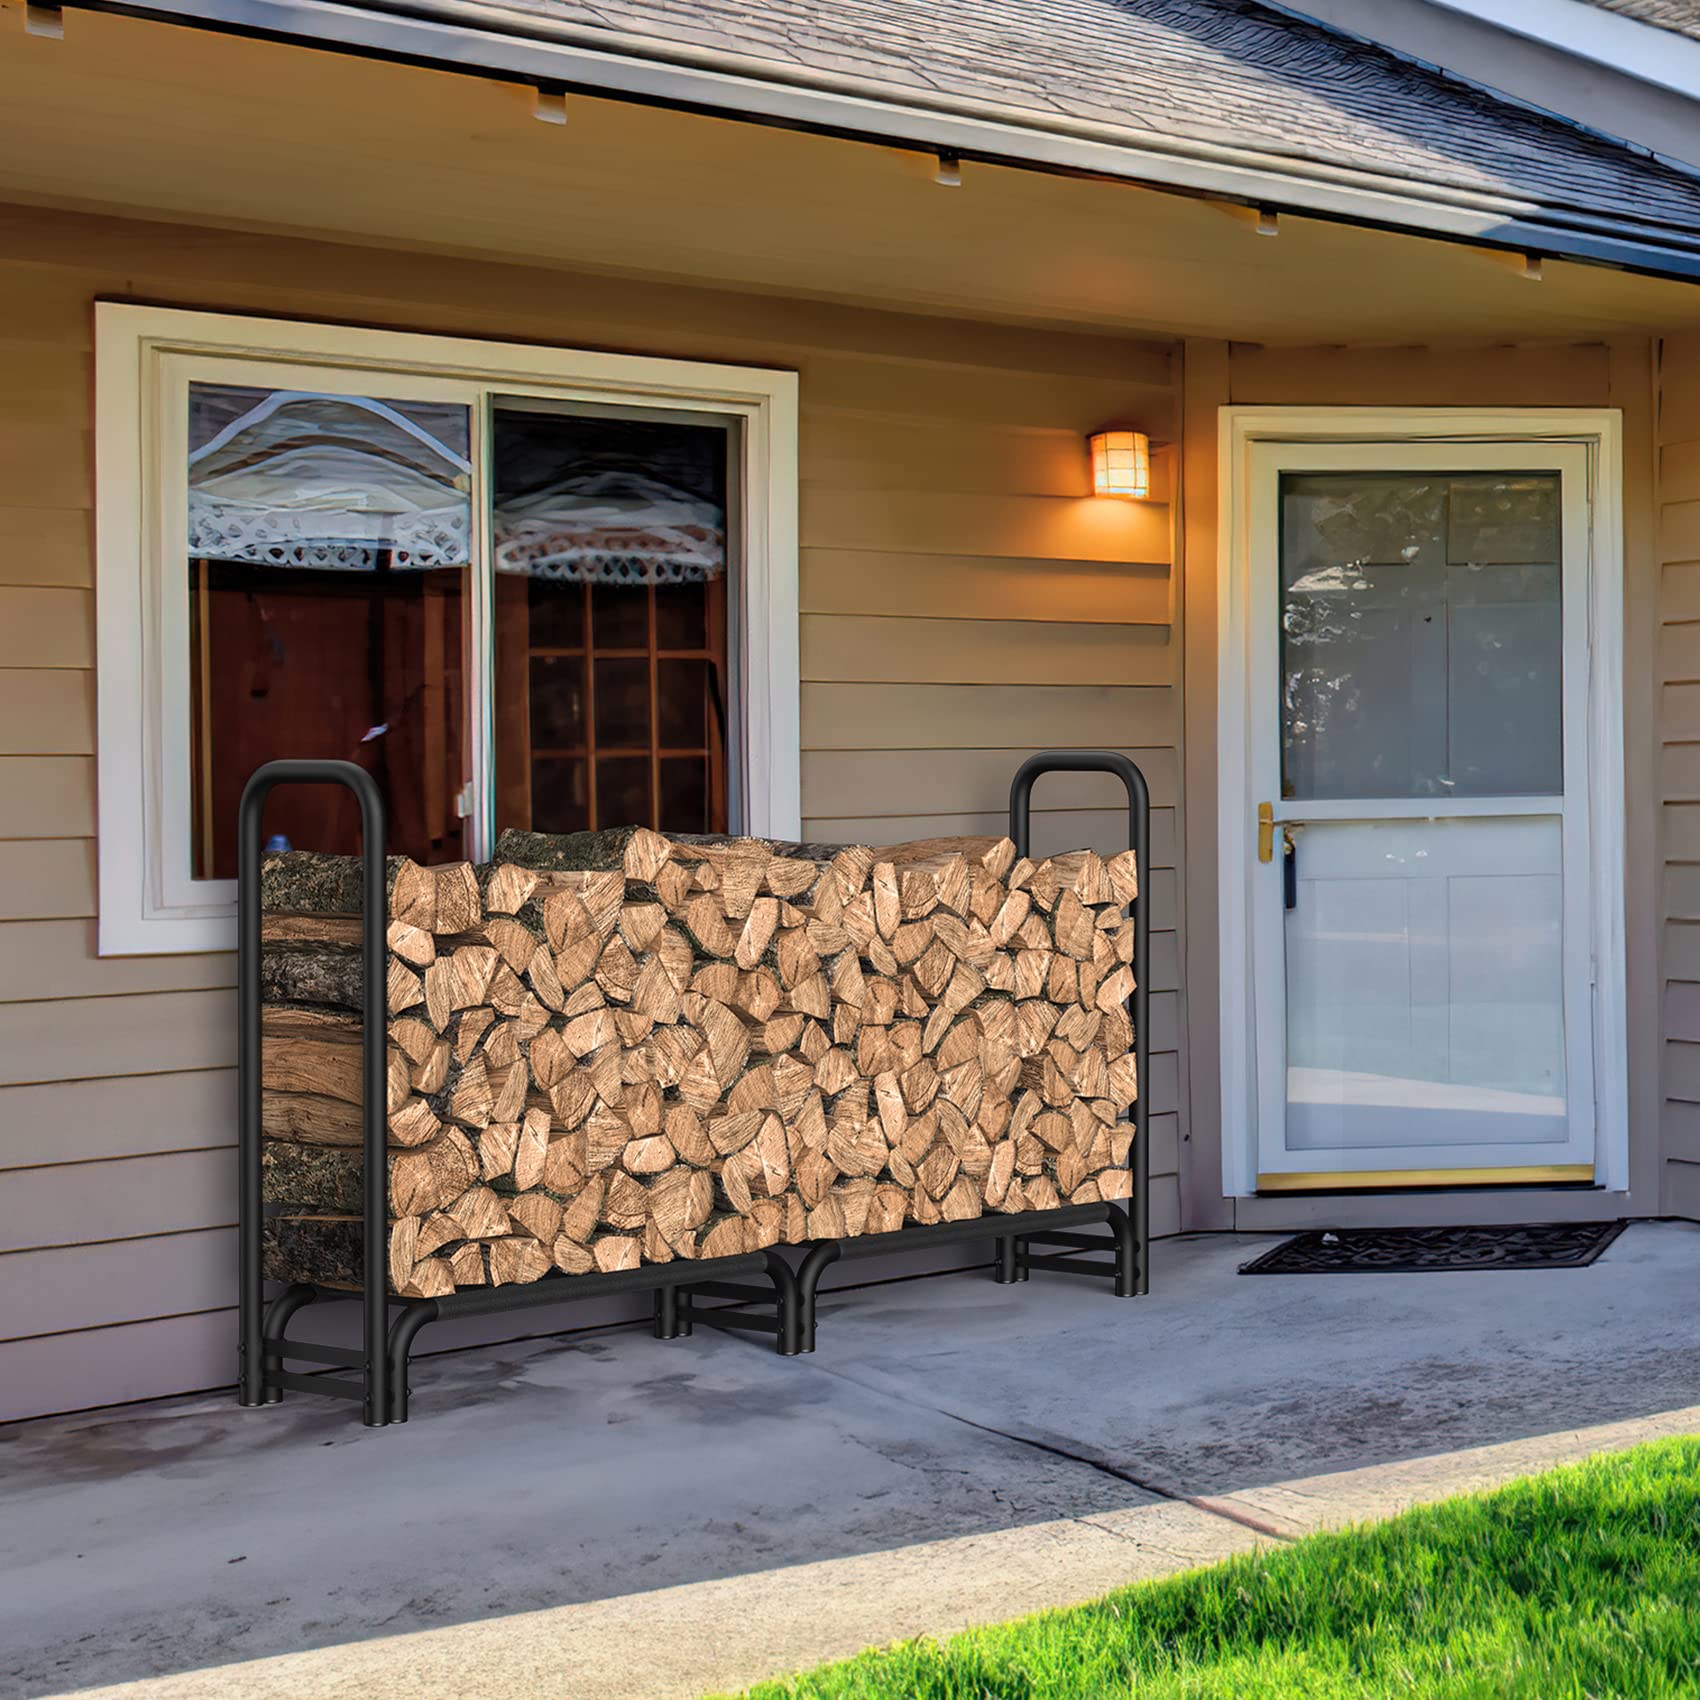 Mr IRONSTONE 8ft Firewood Rack outdoor with Mesh Base, For Store Logs of Various Size, Fireplace Wood Storage indoor for Courtyard, Patio (Capacity 650 lbs)